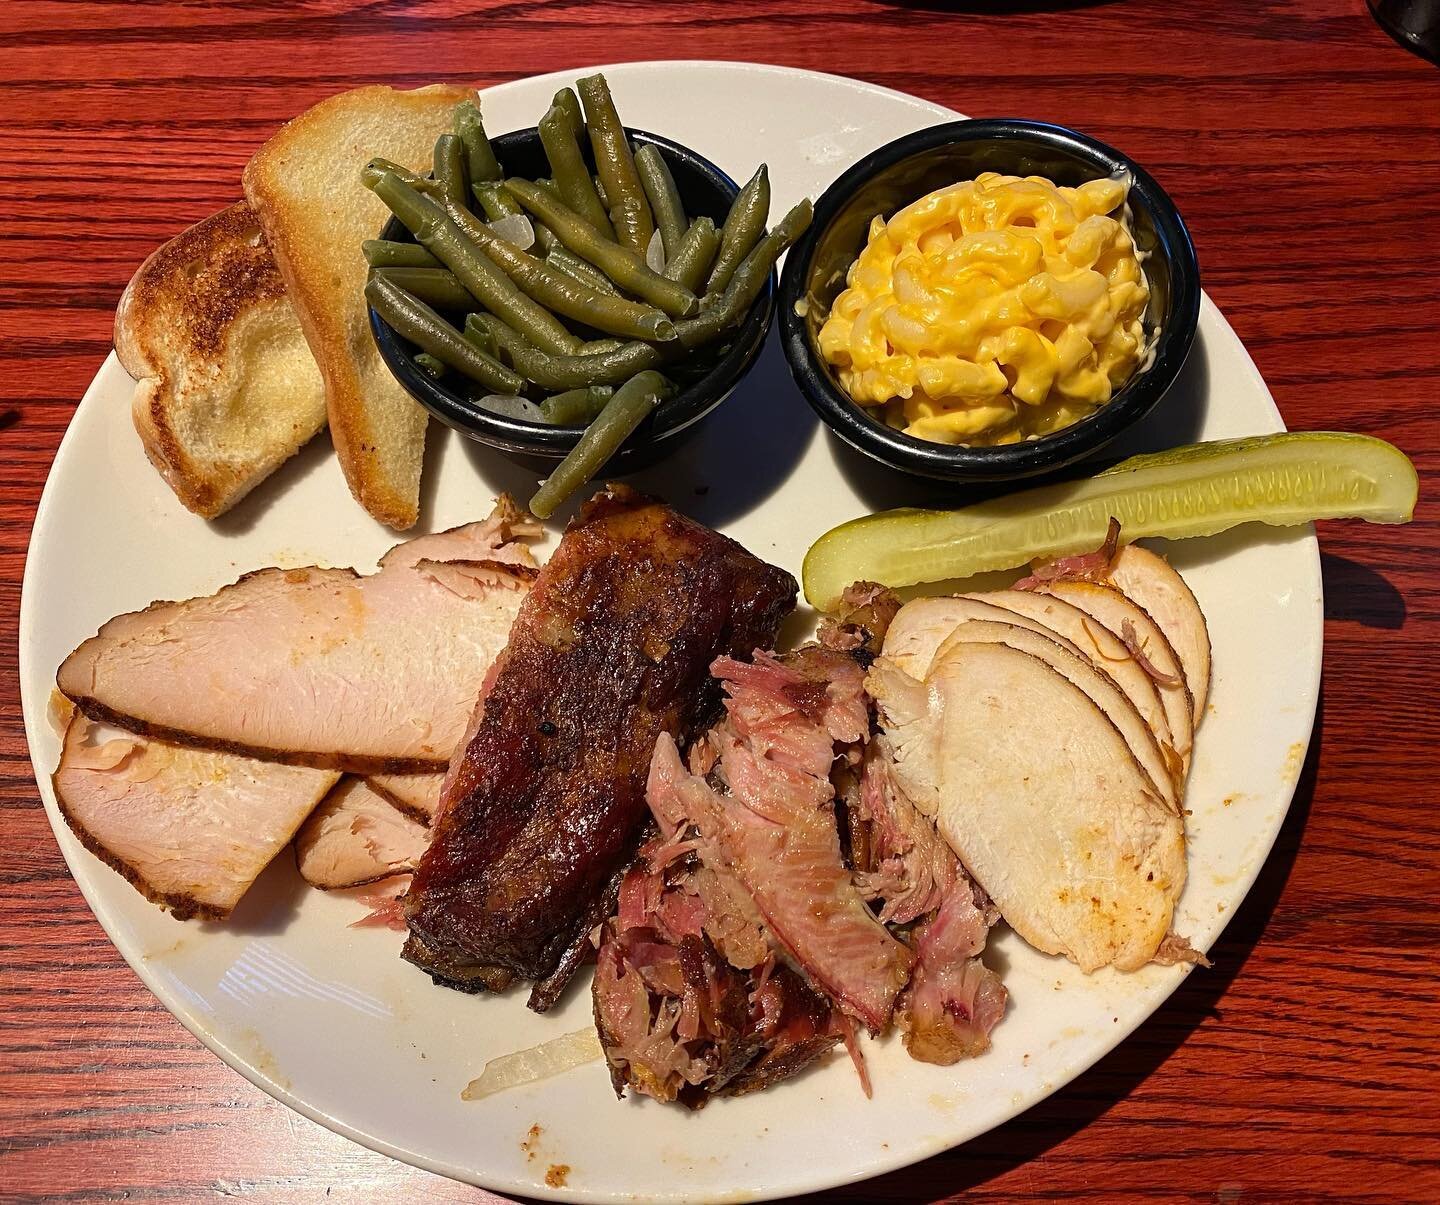 Hmm I know we were there 45 mins b4 close but #leftover dry #meat ?? #ribcrib did not live up to it #barbecue #food #masoncity #macandcheese #greenbeans